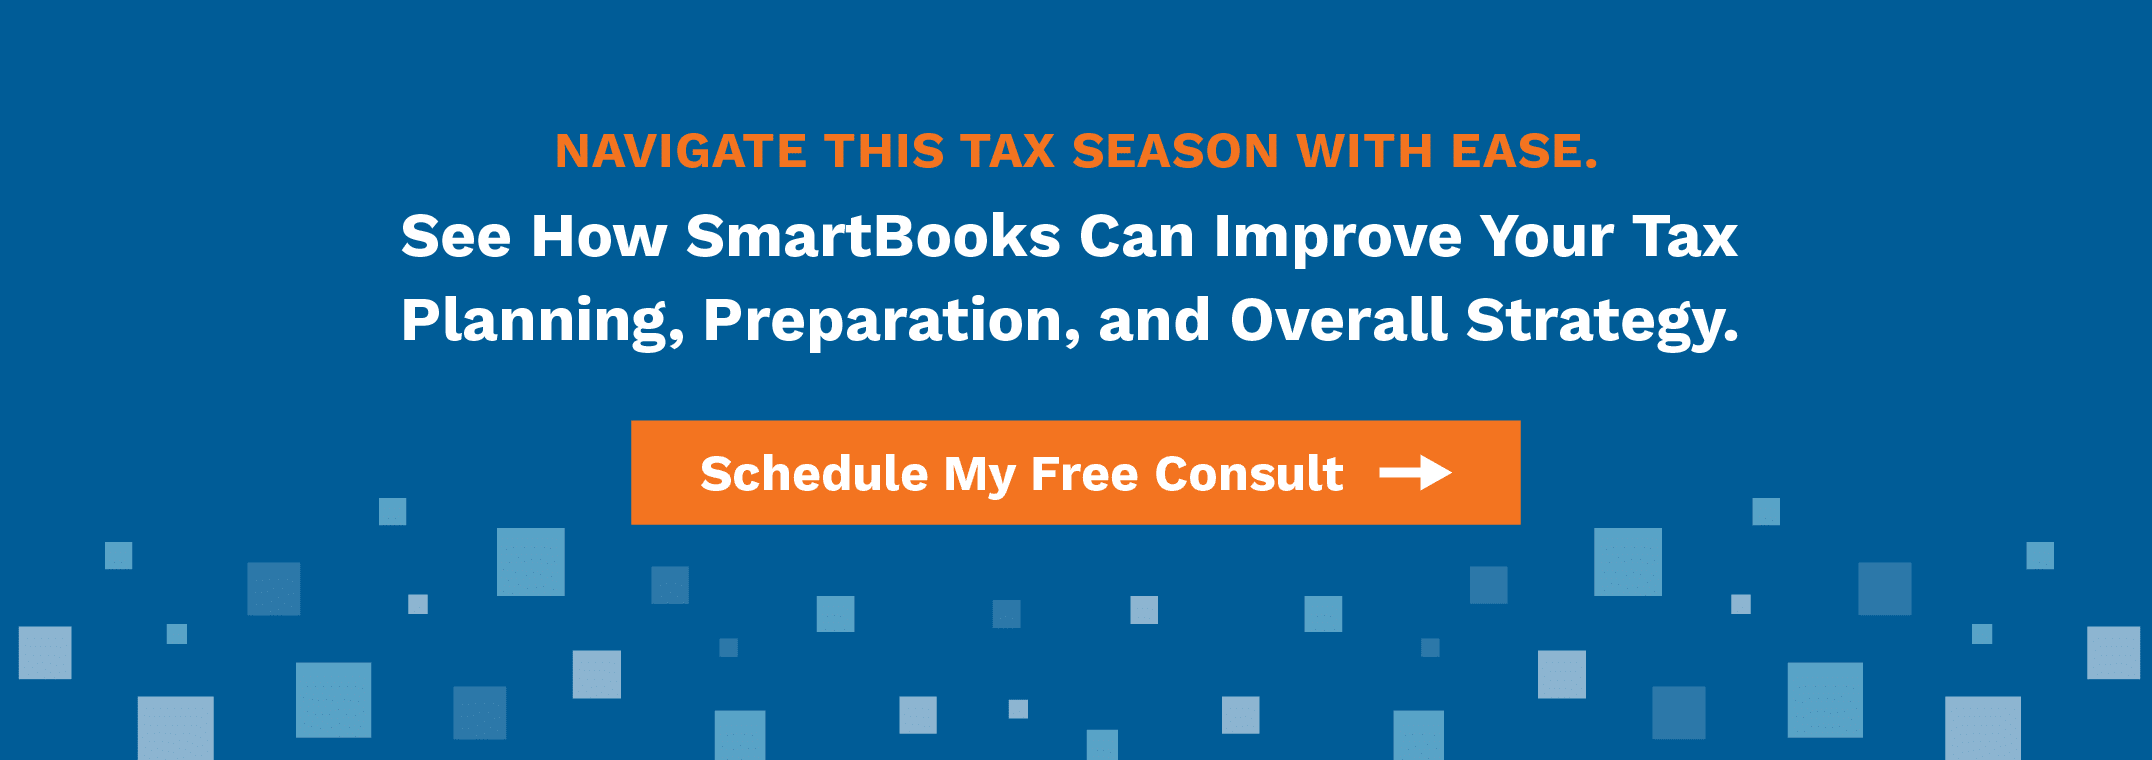 See how SmartBooks can improve your tax strategy, planning, preparation, and overall strategy.